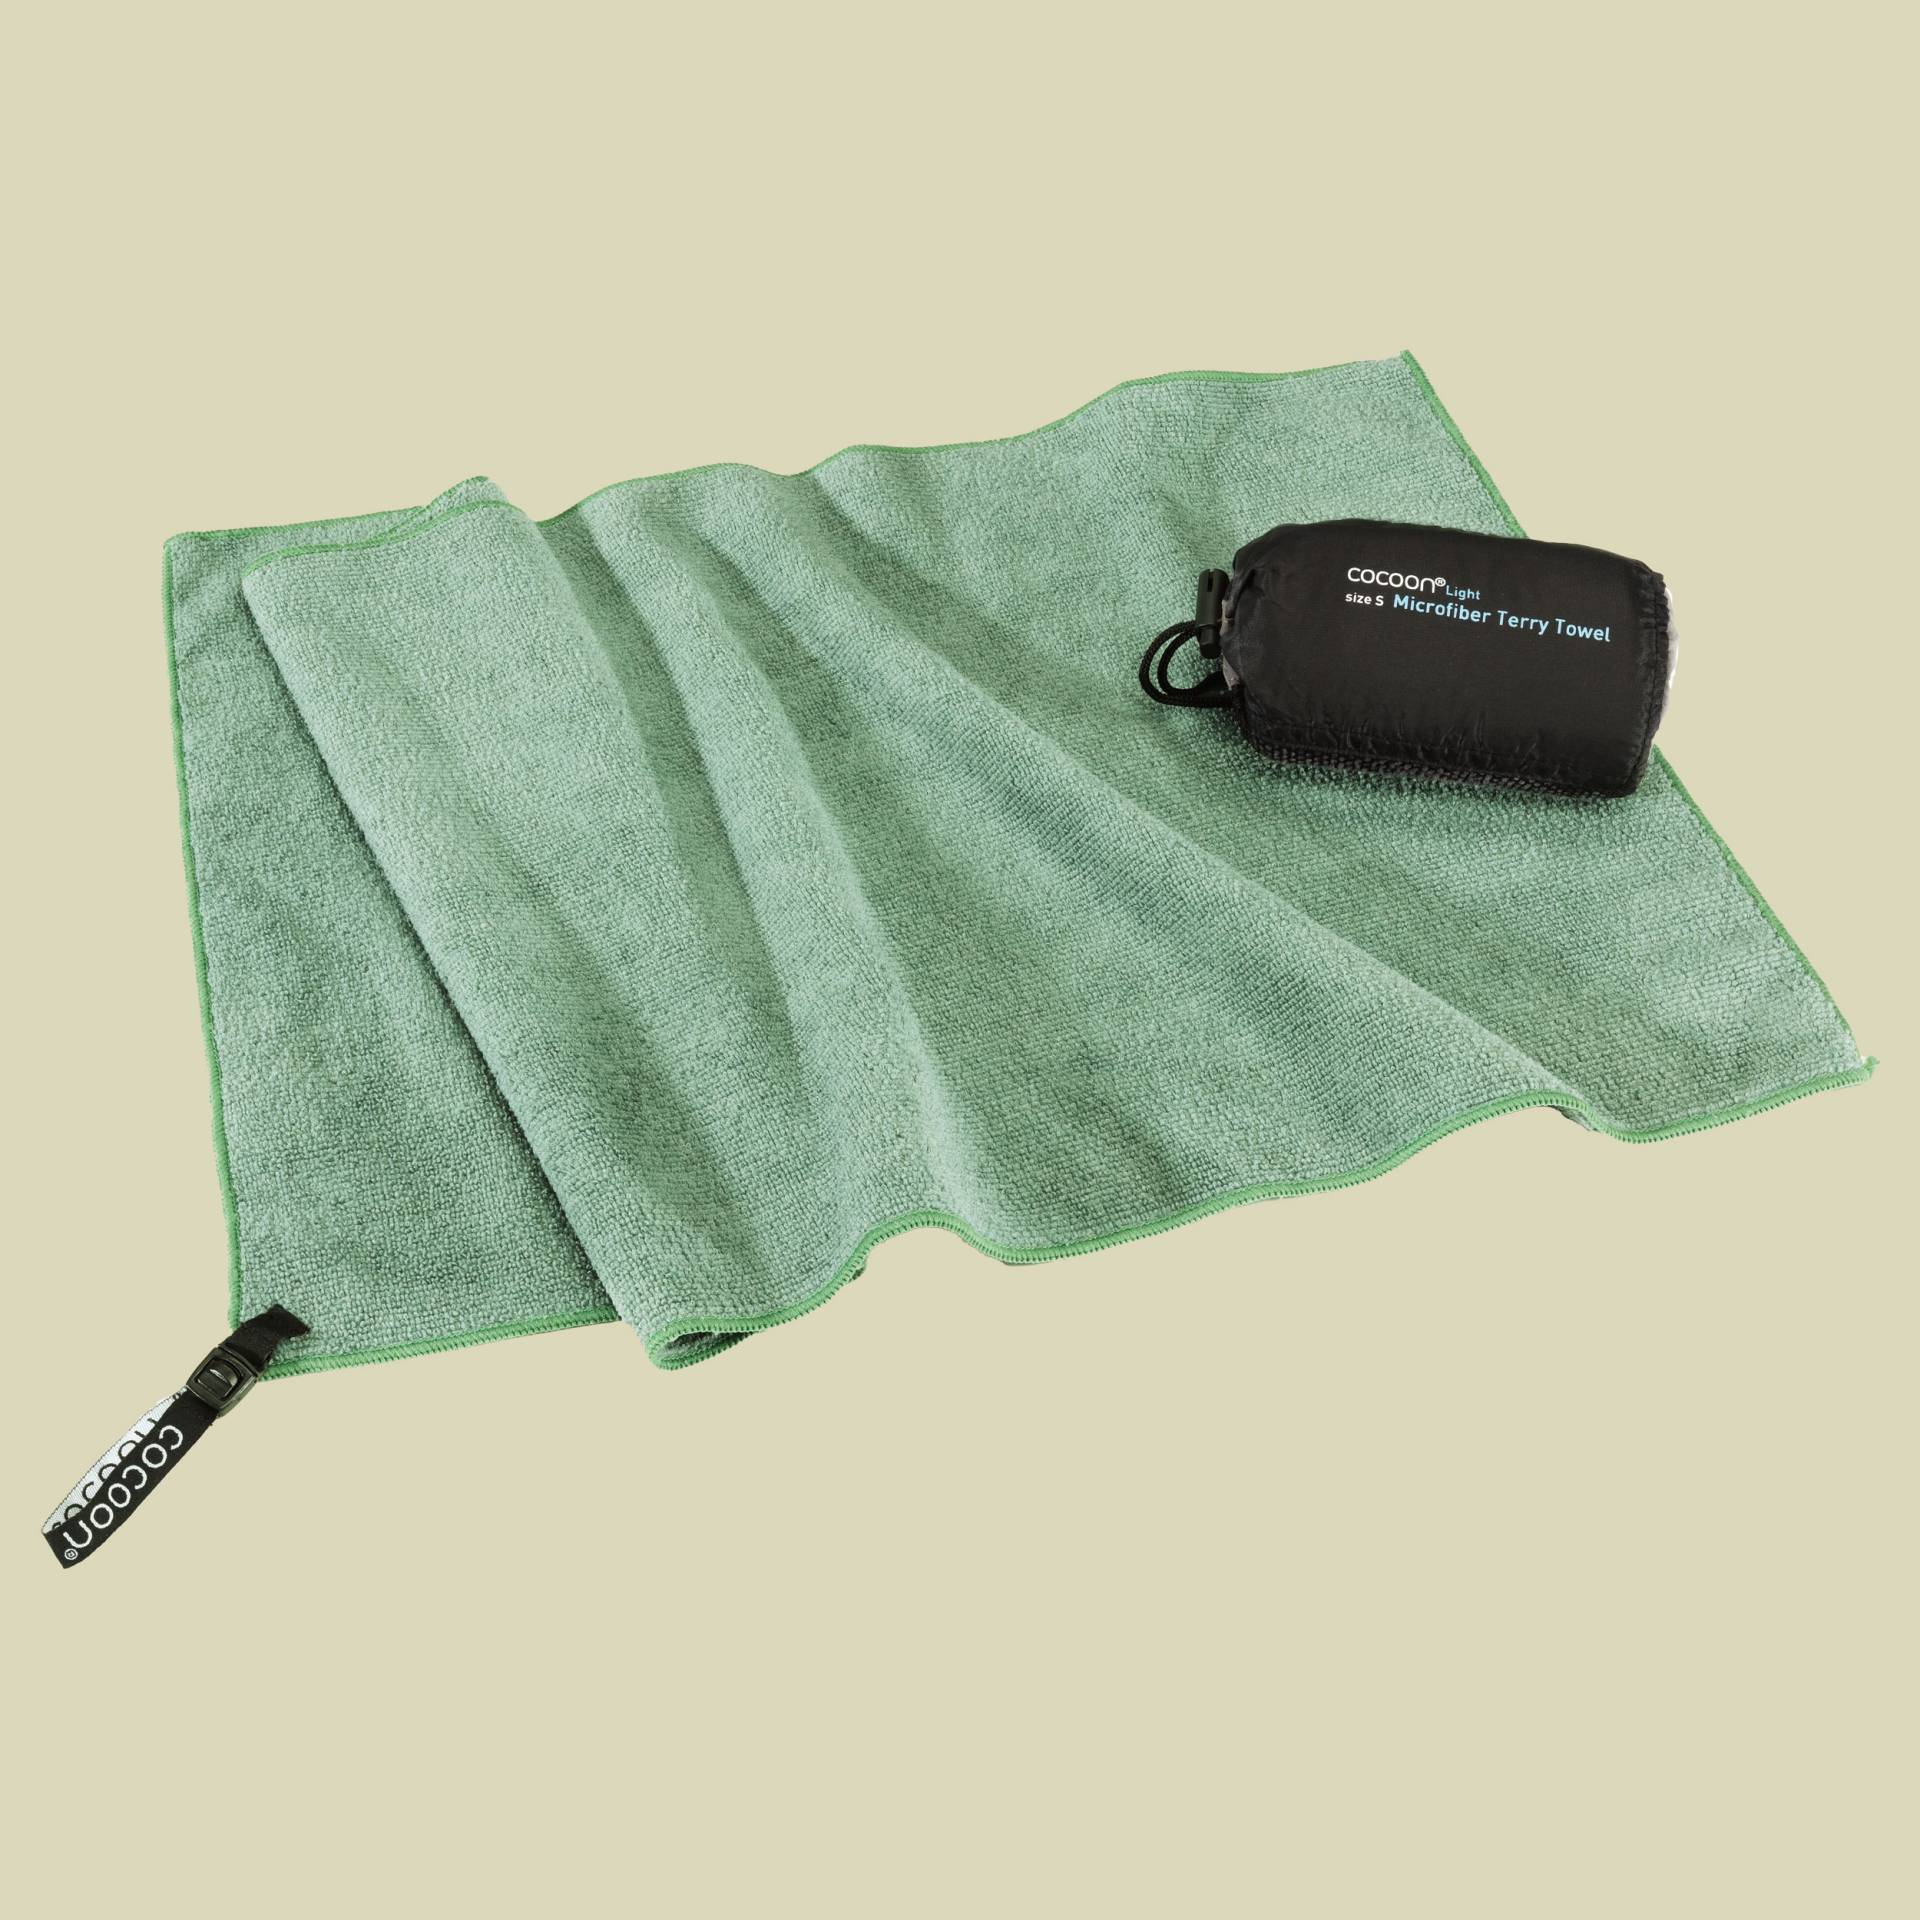 Terry Towel Light Größe large Farbe bamboo green von Cocoon